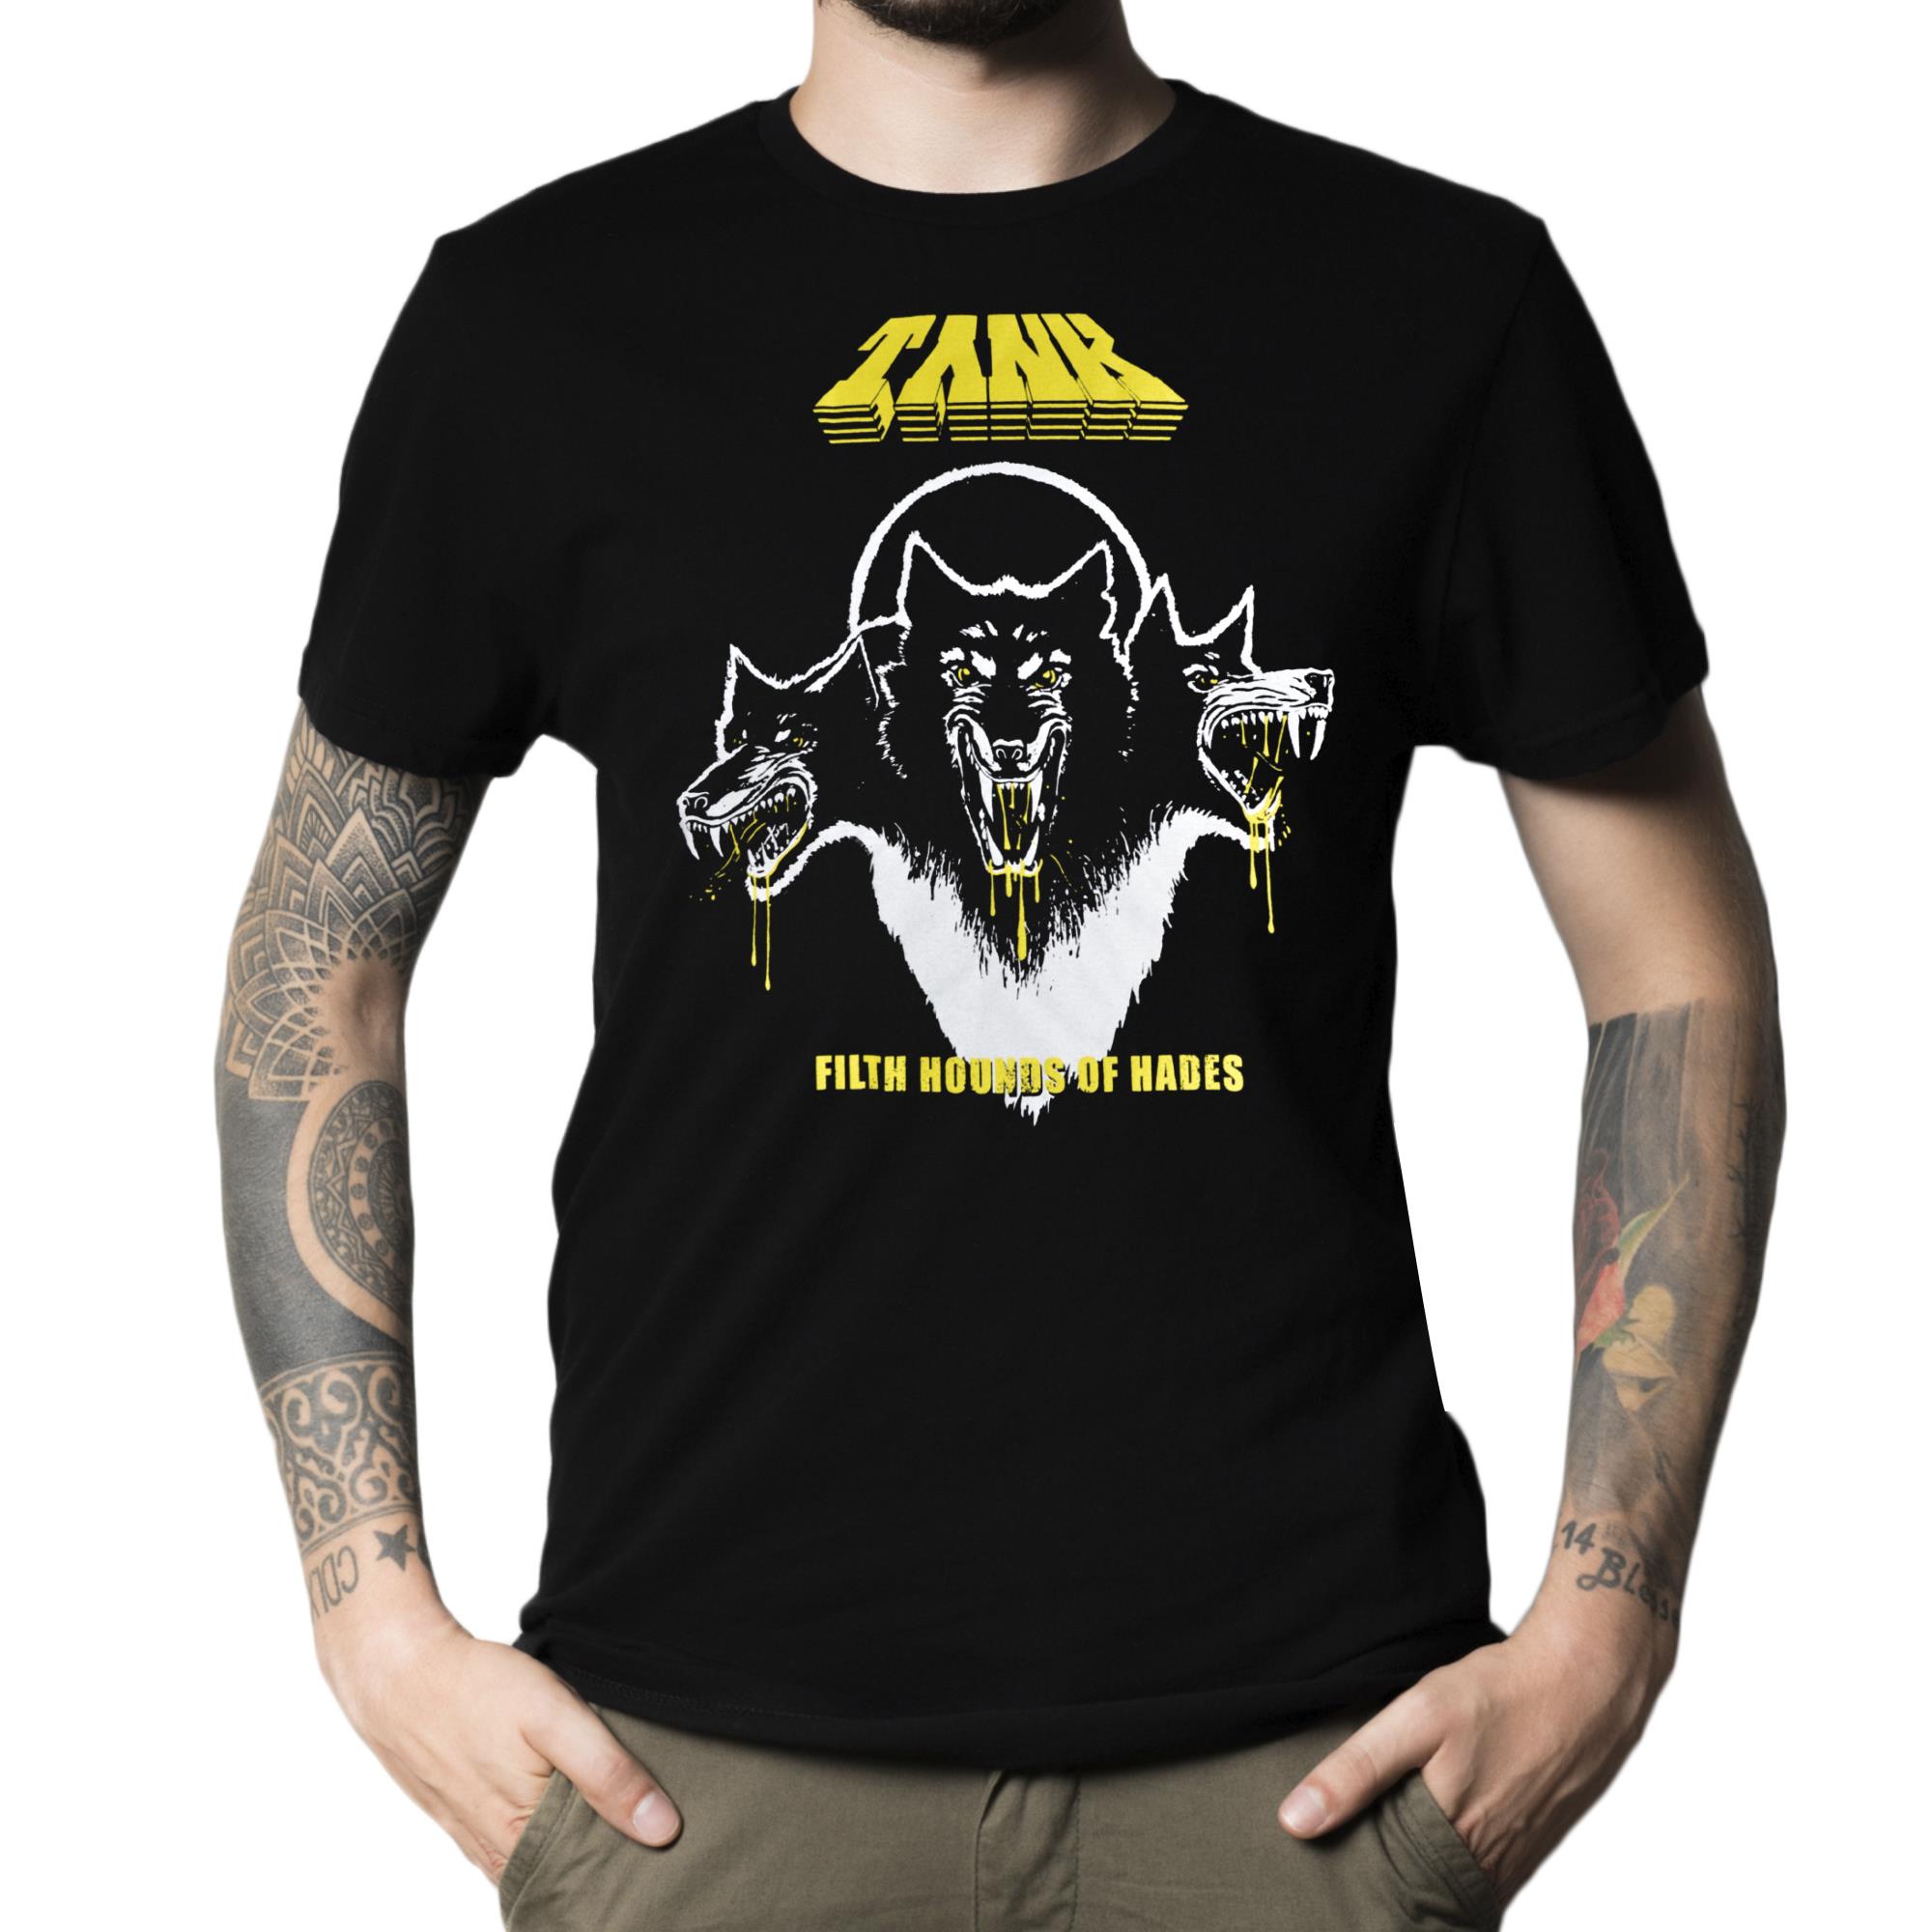 Filth Hounds Of Hades (Import) T-Shirt